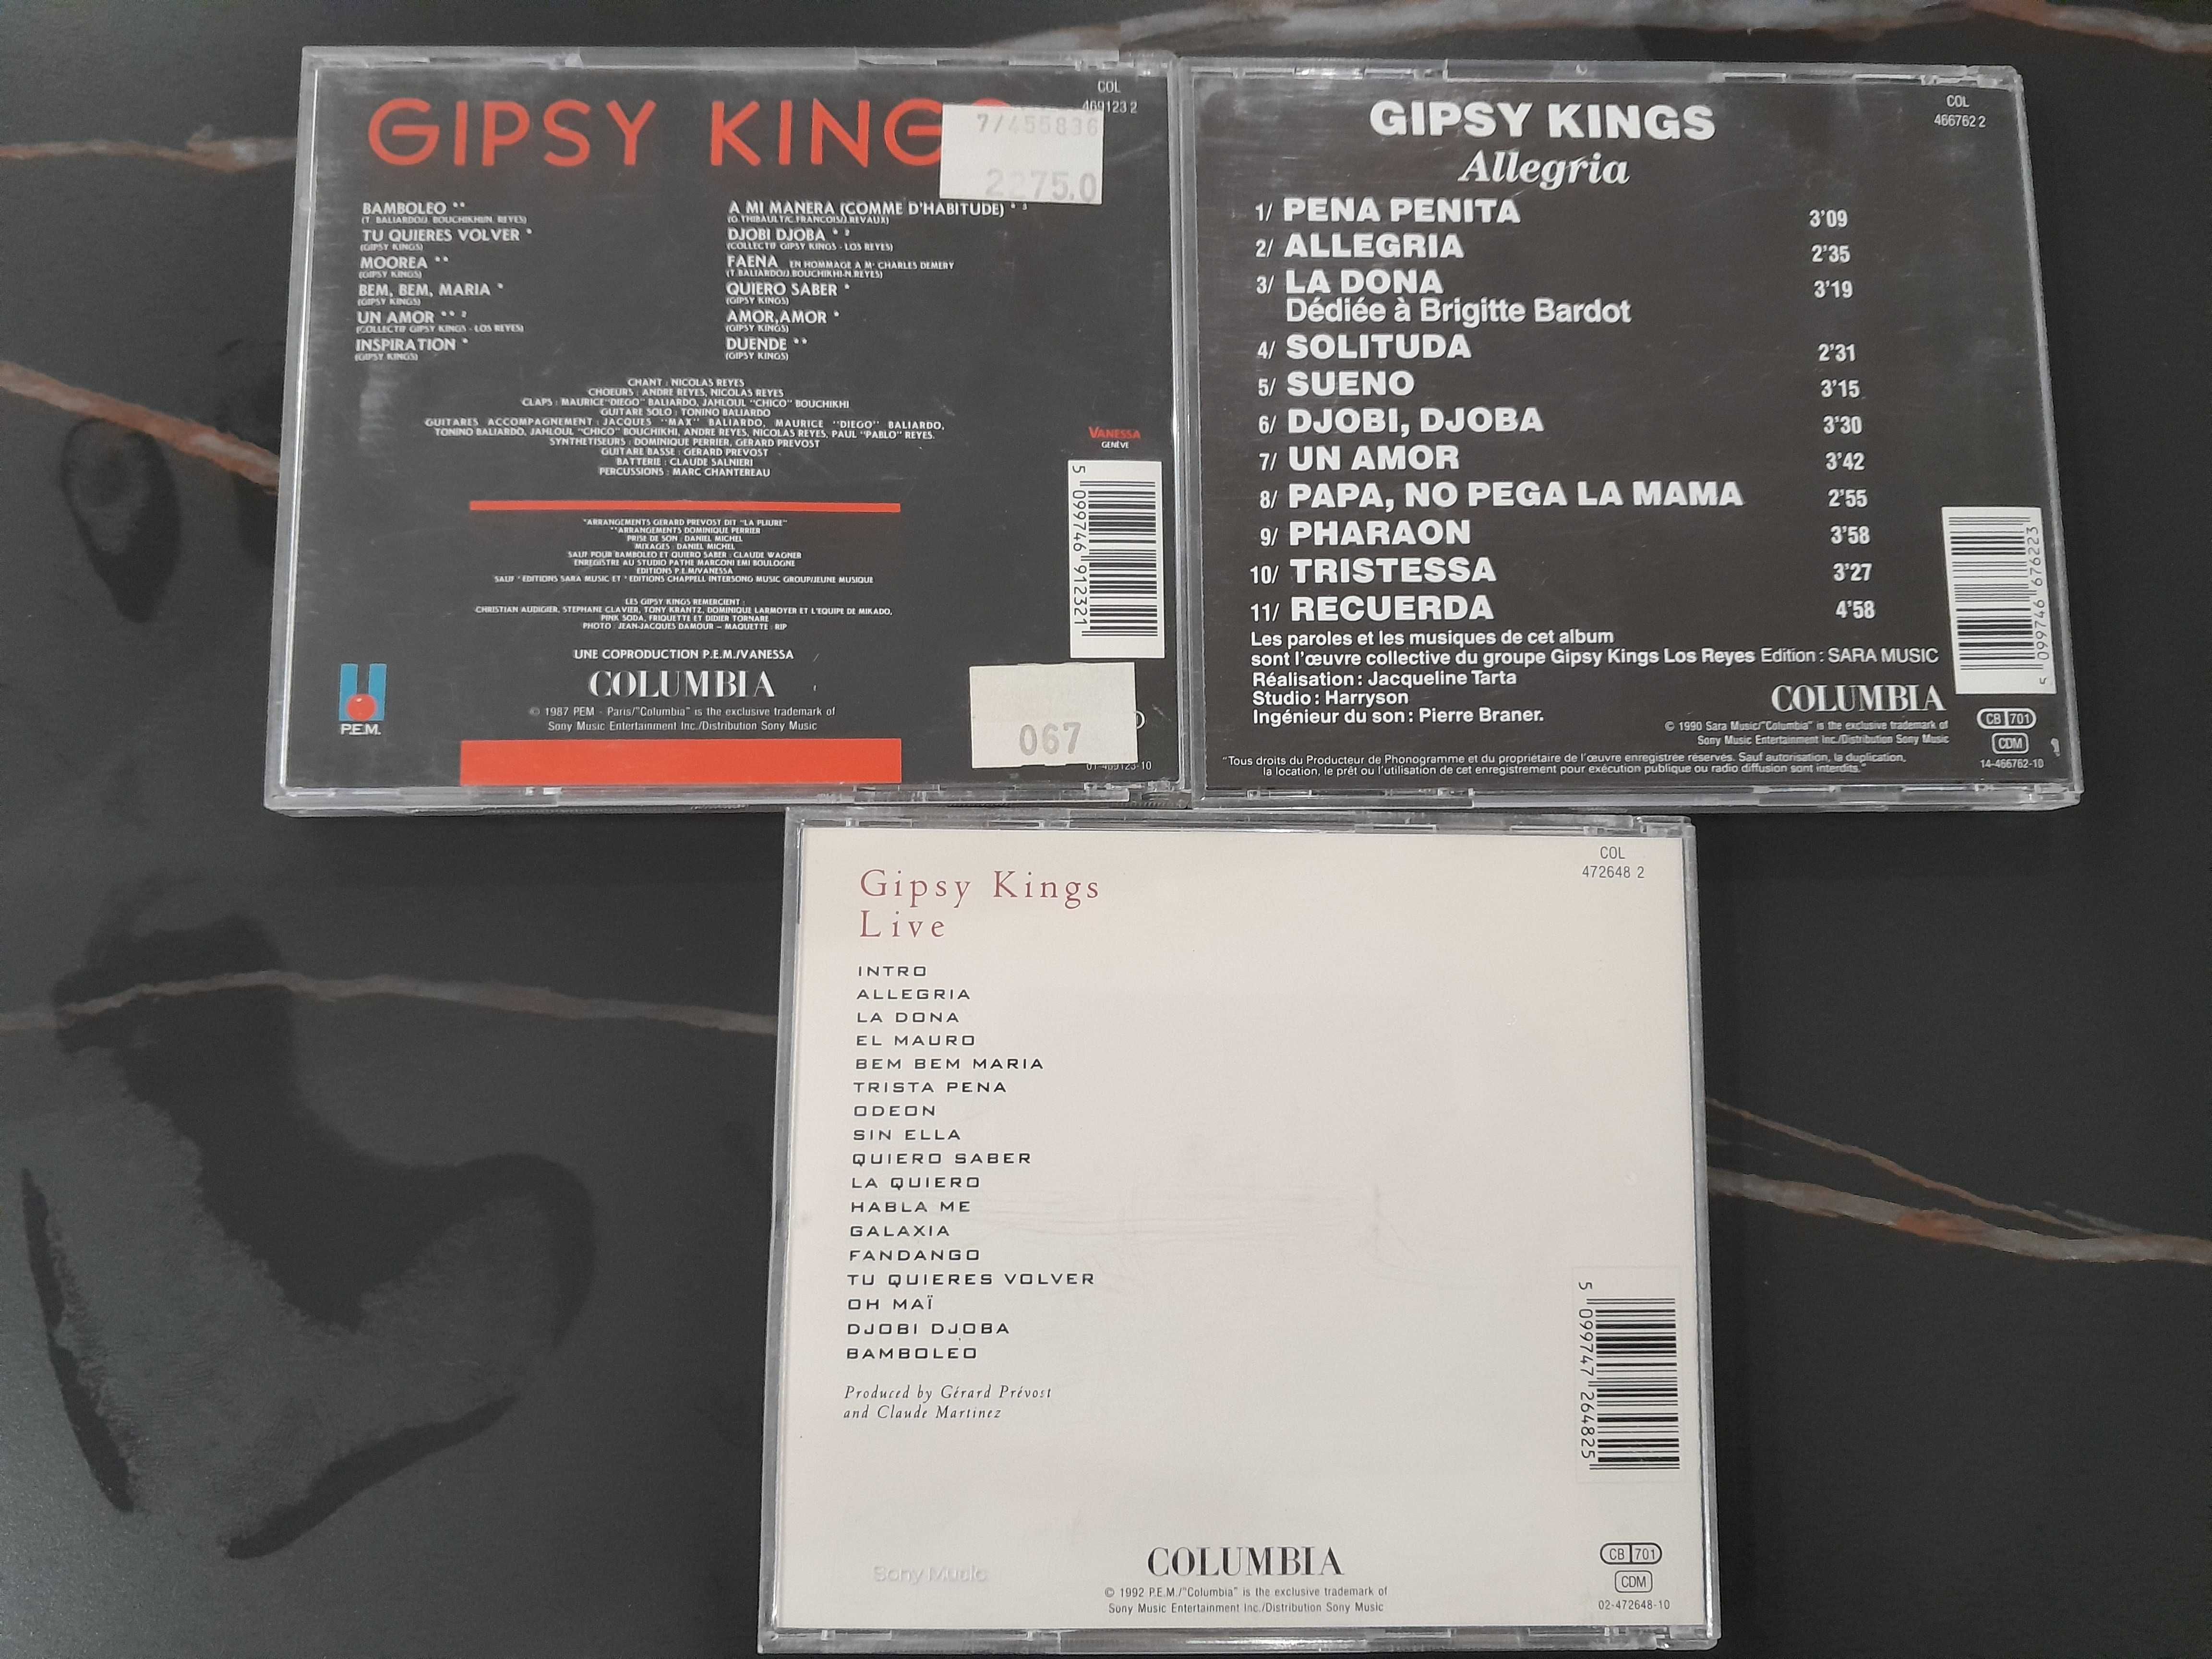 Gipsy Kings - 3CD Live Allegria wyd Colombia